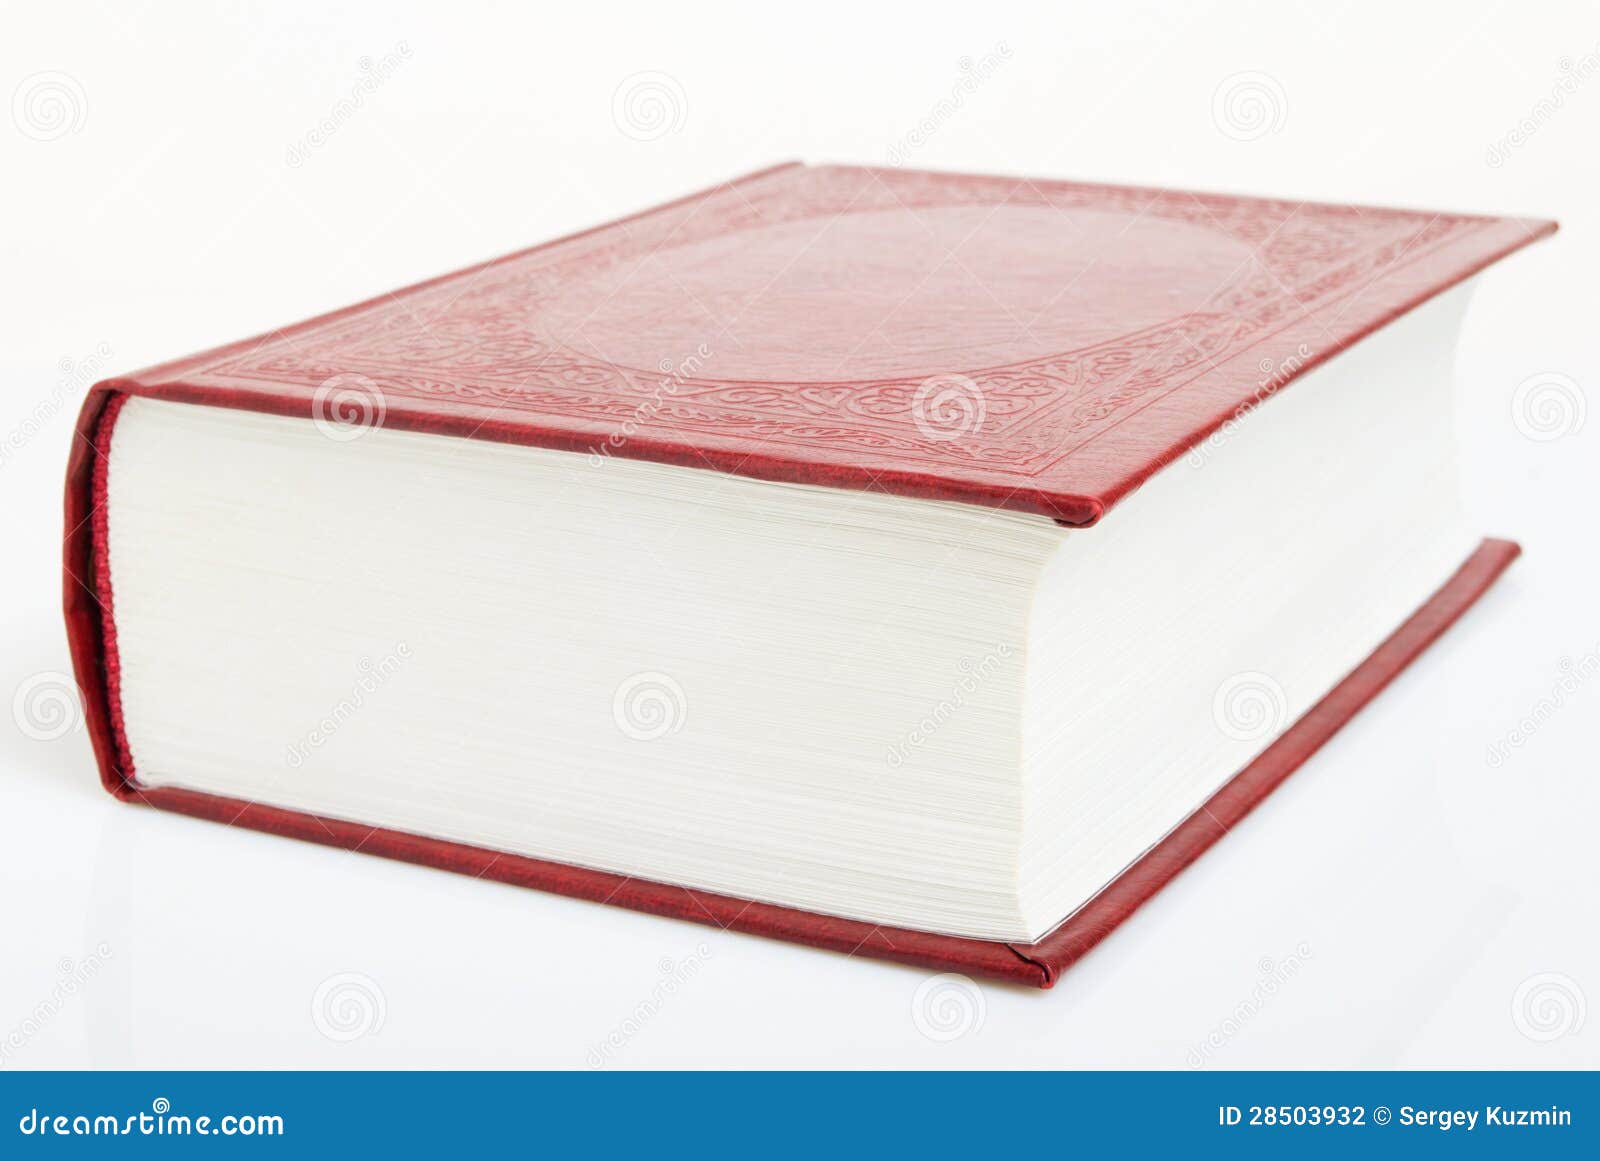 clipart thick book - photo #9